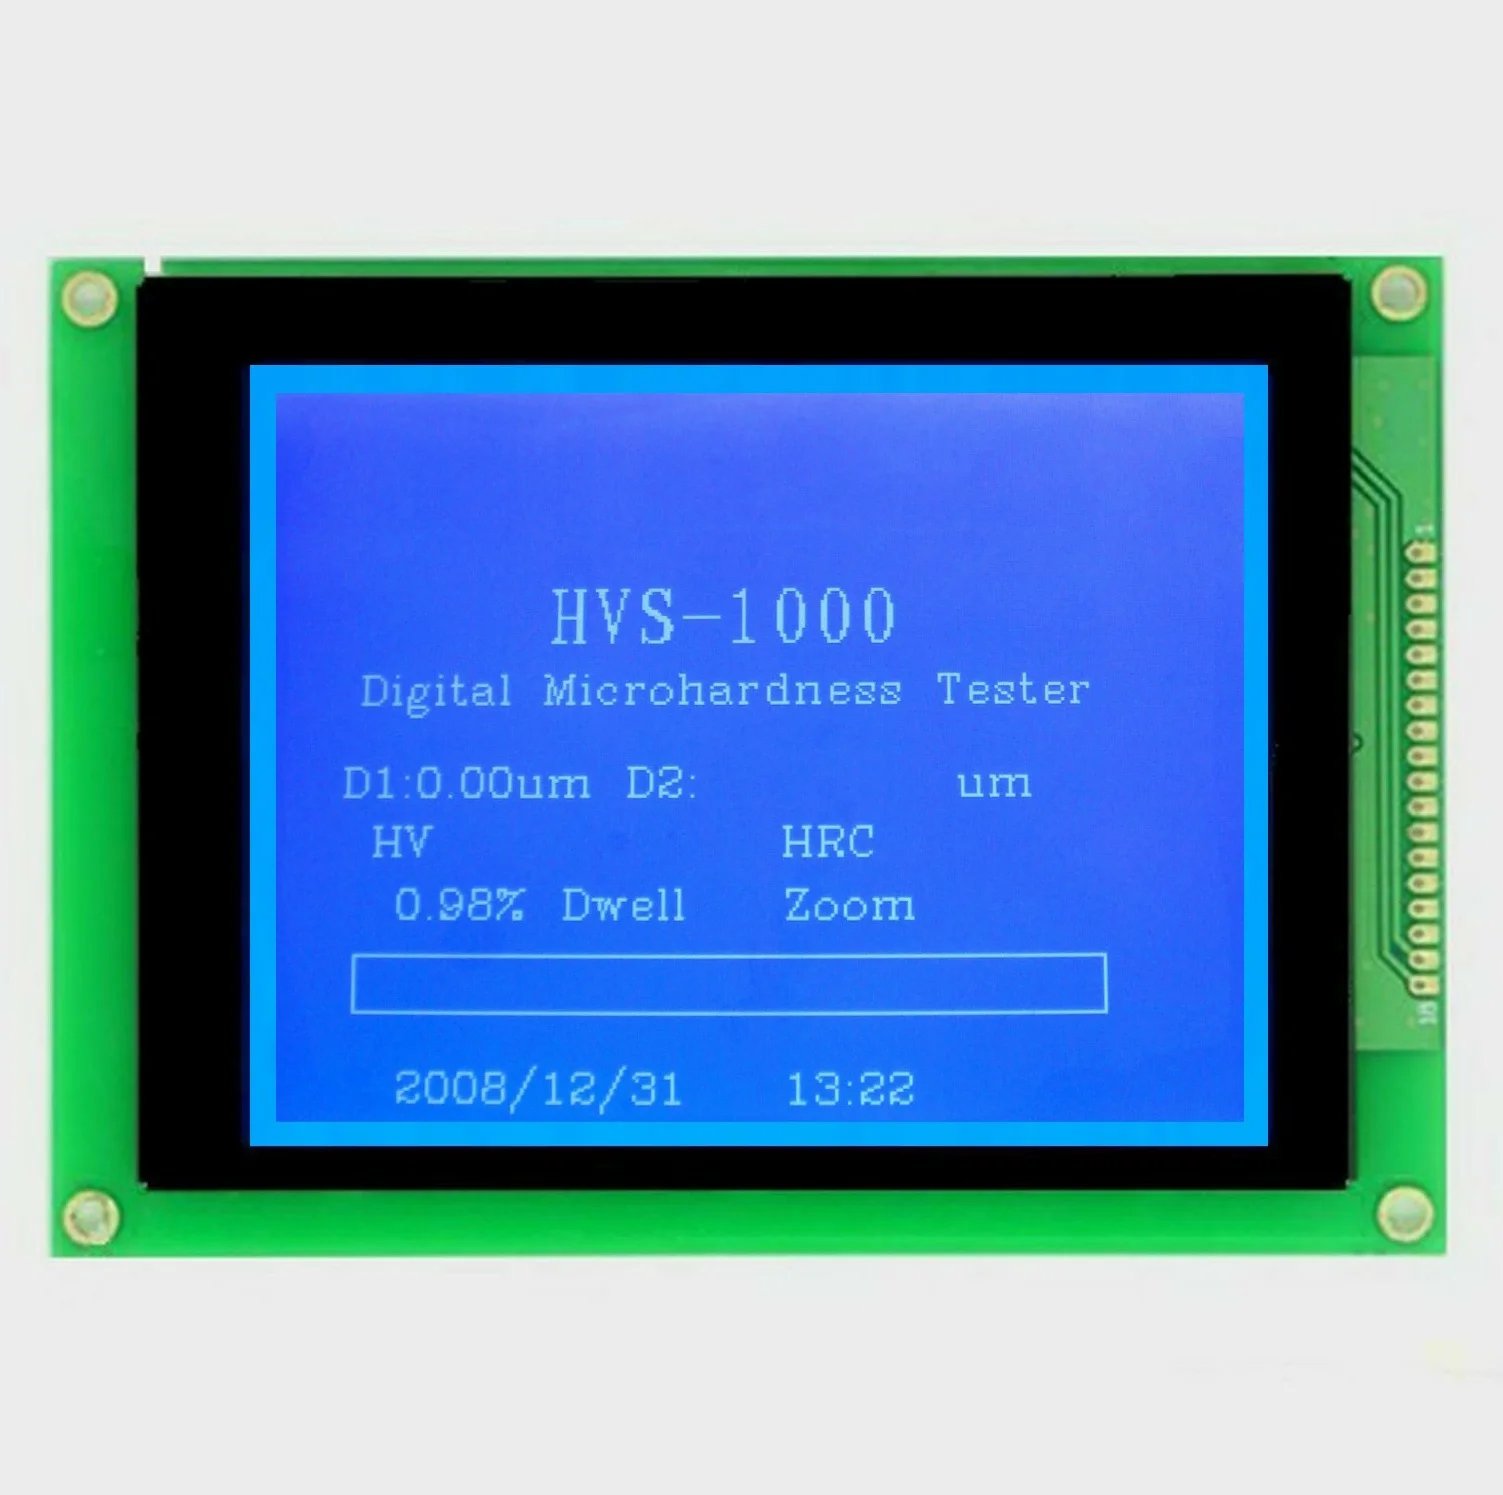 Industrial 5.7 Inch Fstn Lcd Display 320x240 Dots Stn Blue 20 Pin 8 Bit  Parallel Ra8835 3.3v/5v Lcd Display Module 320240 - Buy 320x240 Stn Graphic  Lcd,Greyscale Lcd,320x240 Graphic Lcd Module Product